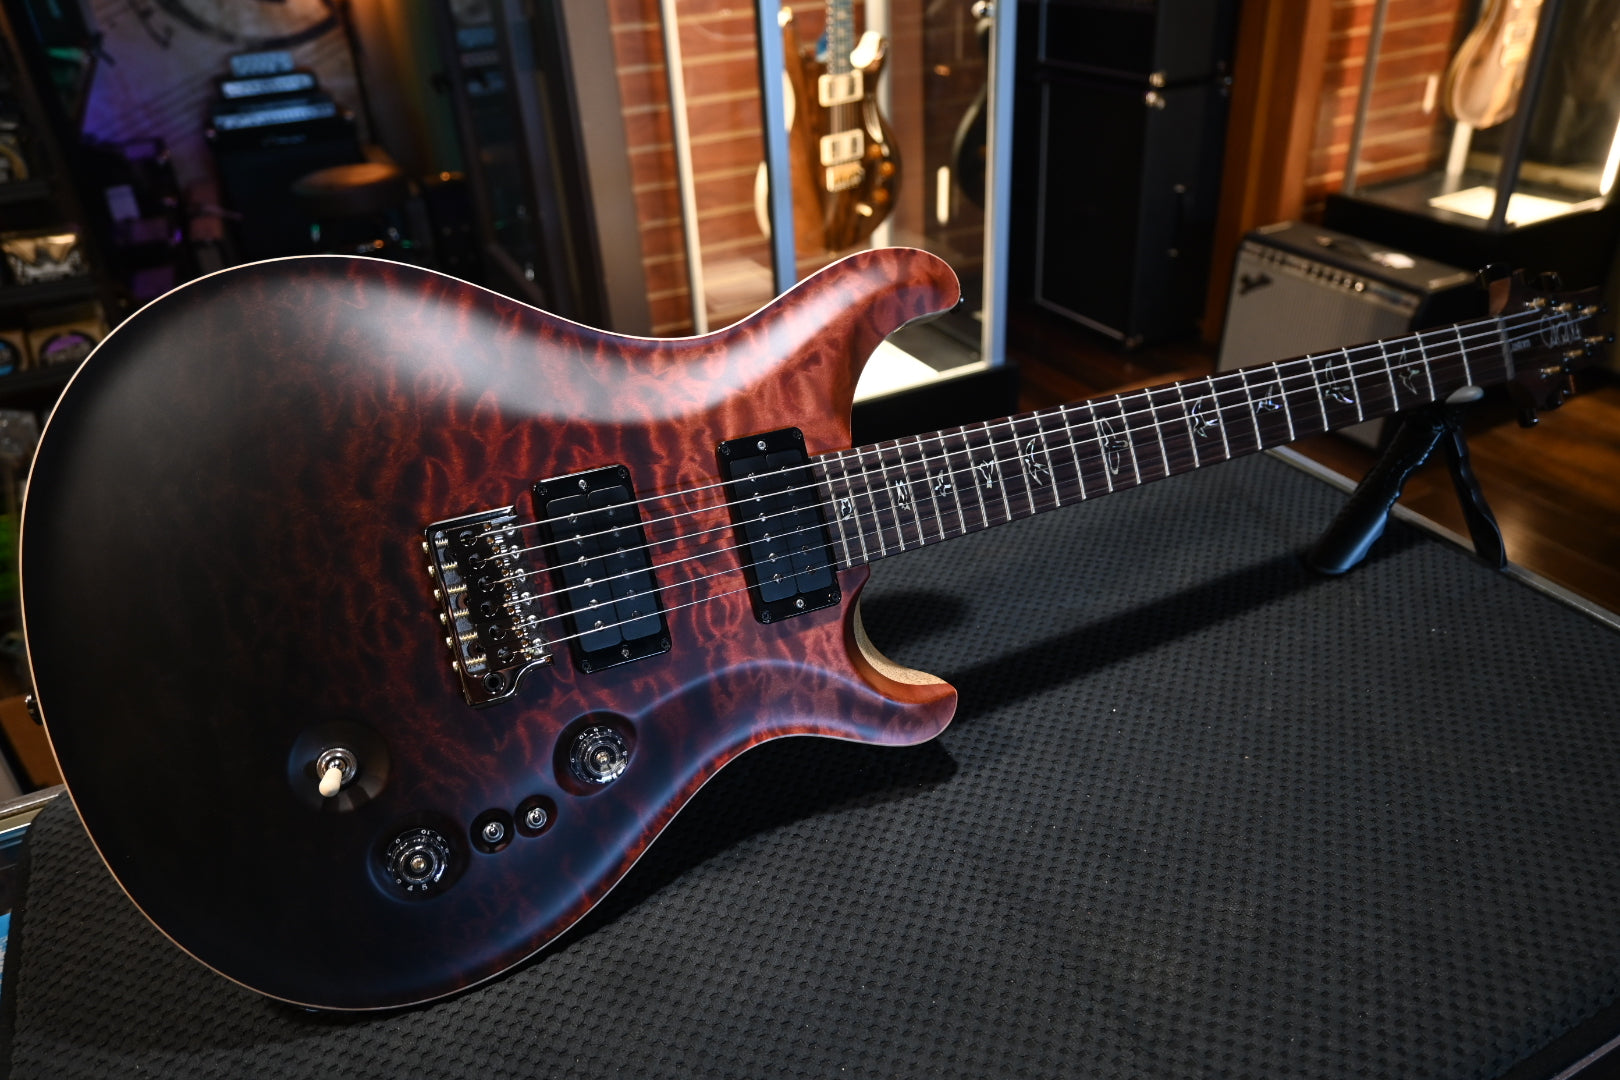 PRS Wood Library Custom 24-08 10-Top Quilt Korina Back Torr. Maple Neck - Fire Red to Grey Black Fade Guitar #9950 - Danville Music